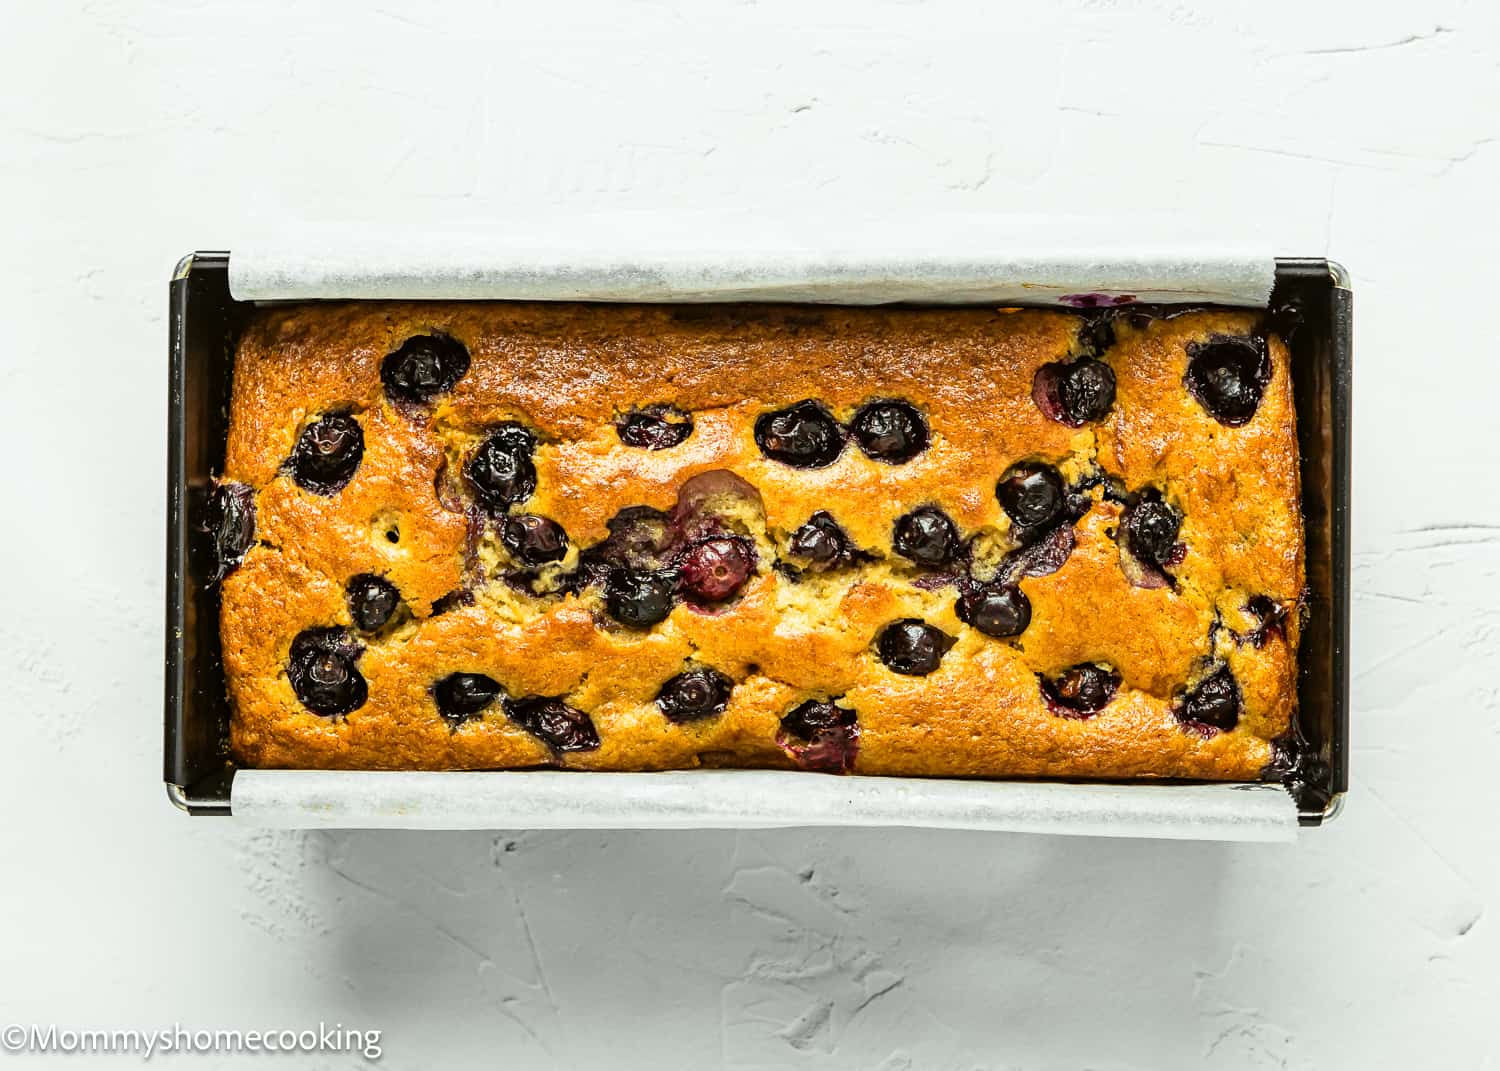 baked Blueberry Banana Bread in a loaf pan.